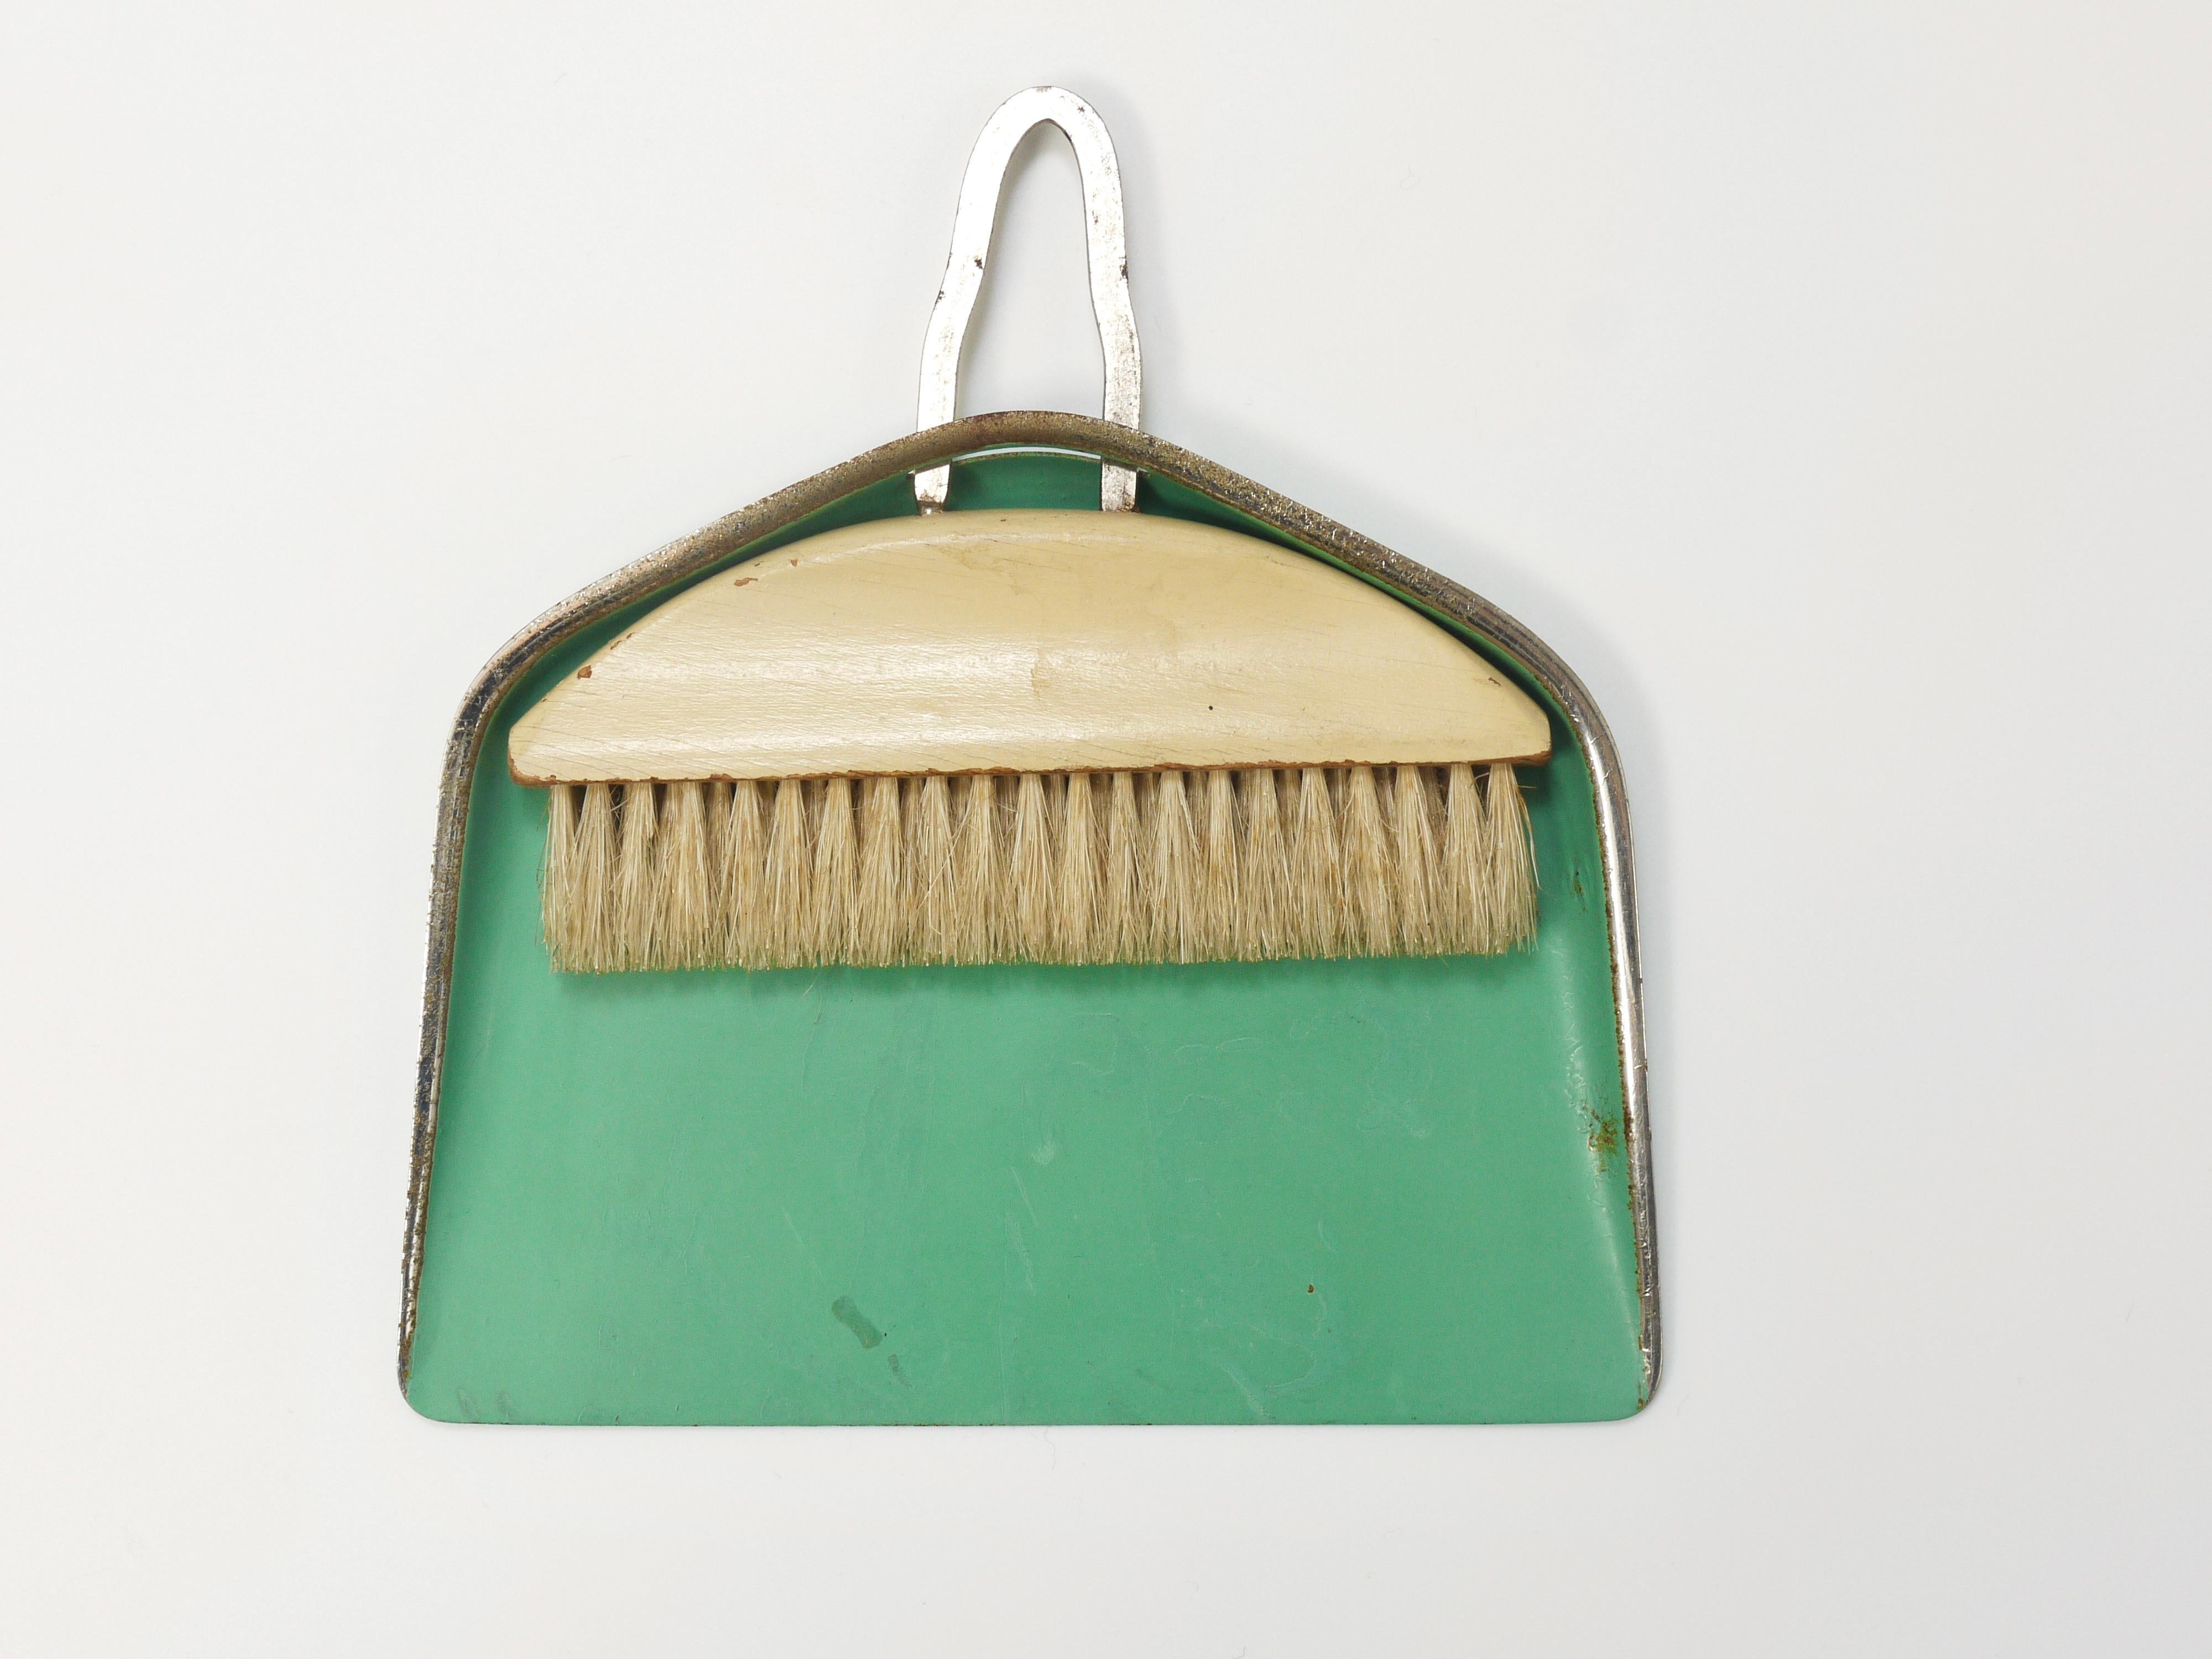 An iconic Bauhaus table brush and pan sweeping set from the early 1930s in light-green / pastel jade green. Designed by Marianne Brandt (1893-1983), manufactured by Ruppel Werke, Ruppelwerke in Gotha, Germany. Made of sheet metal and wood. In good